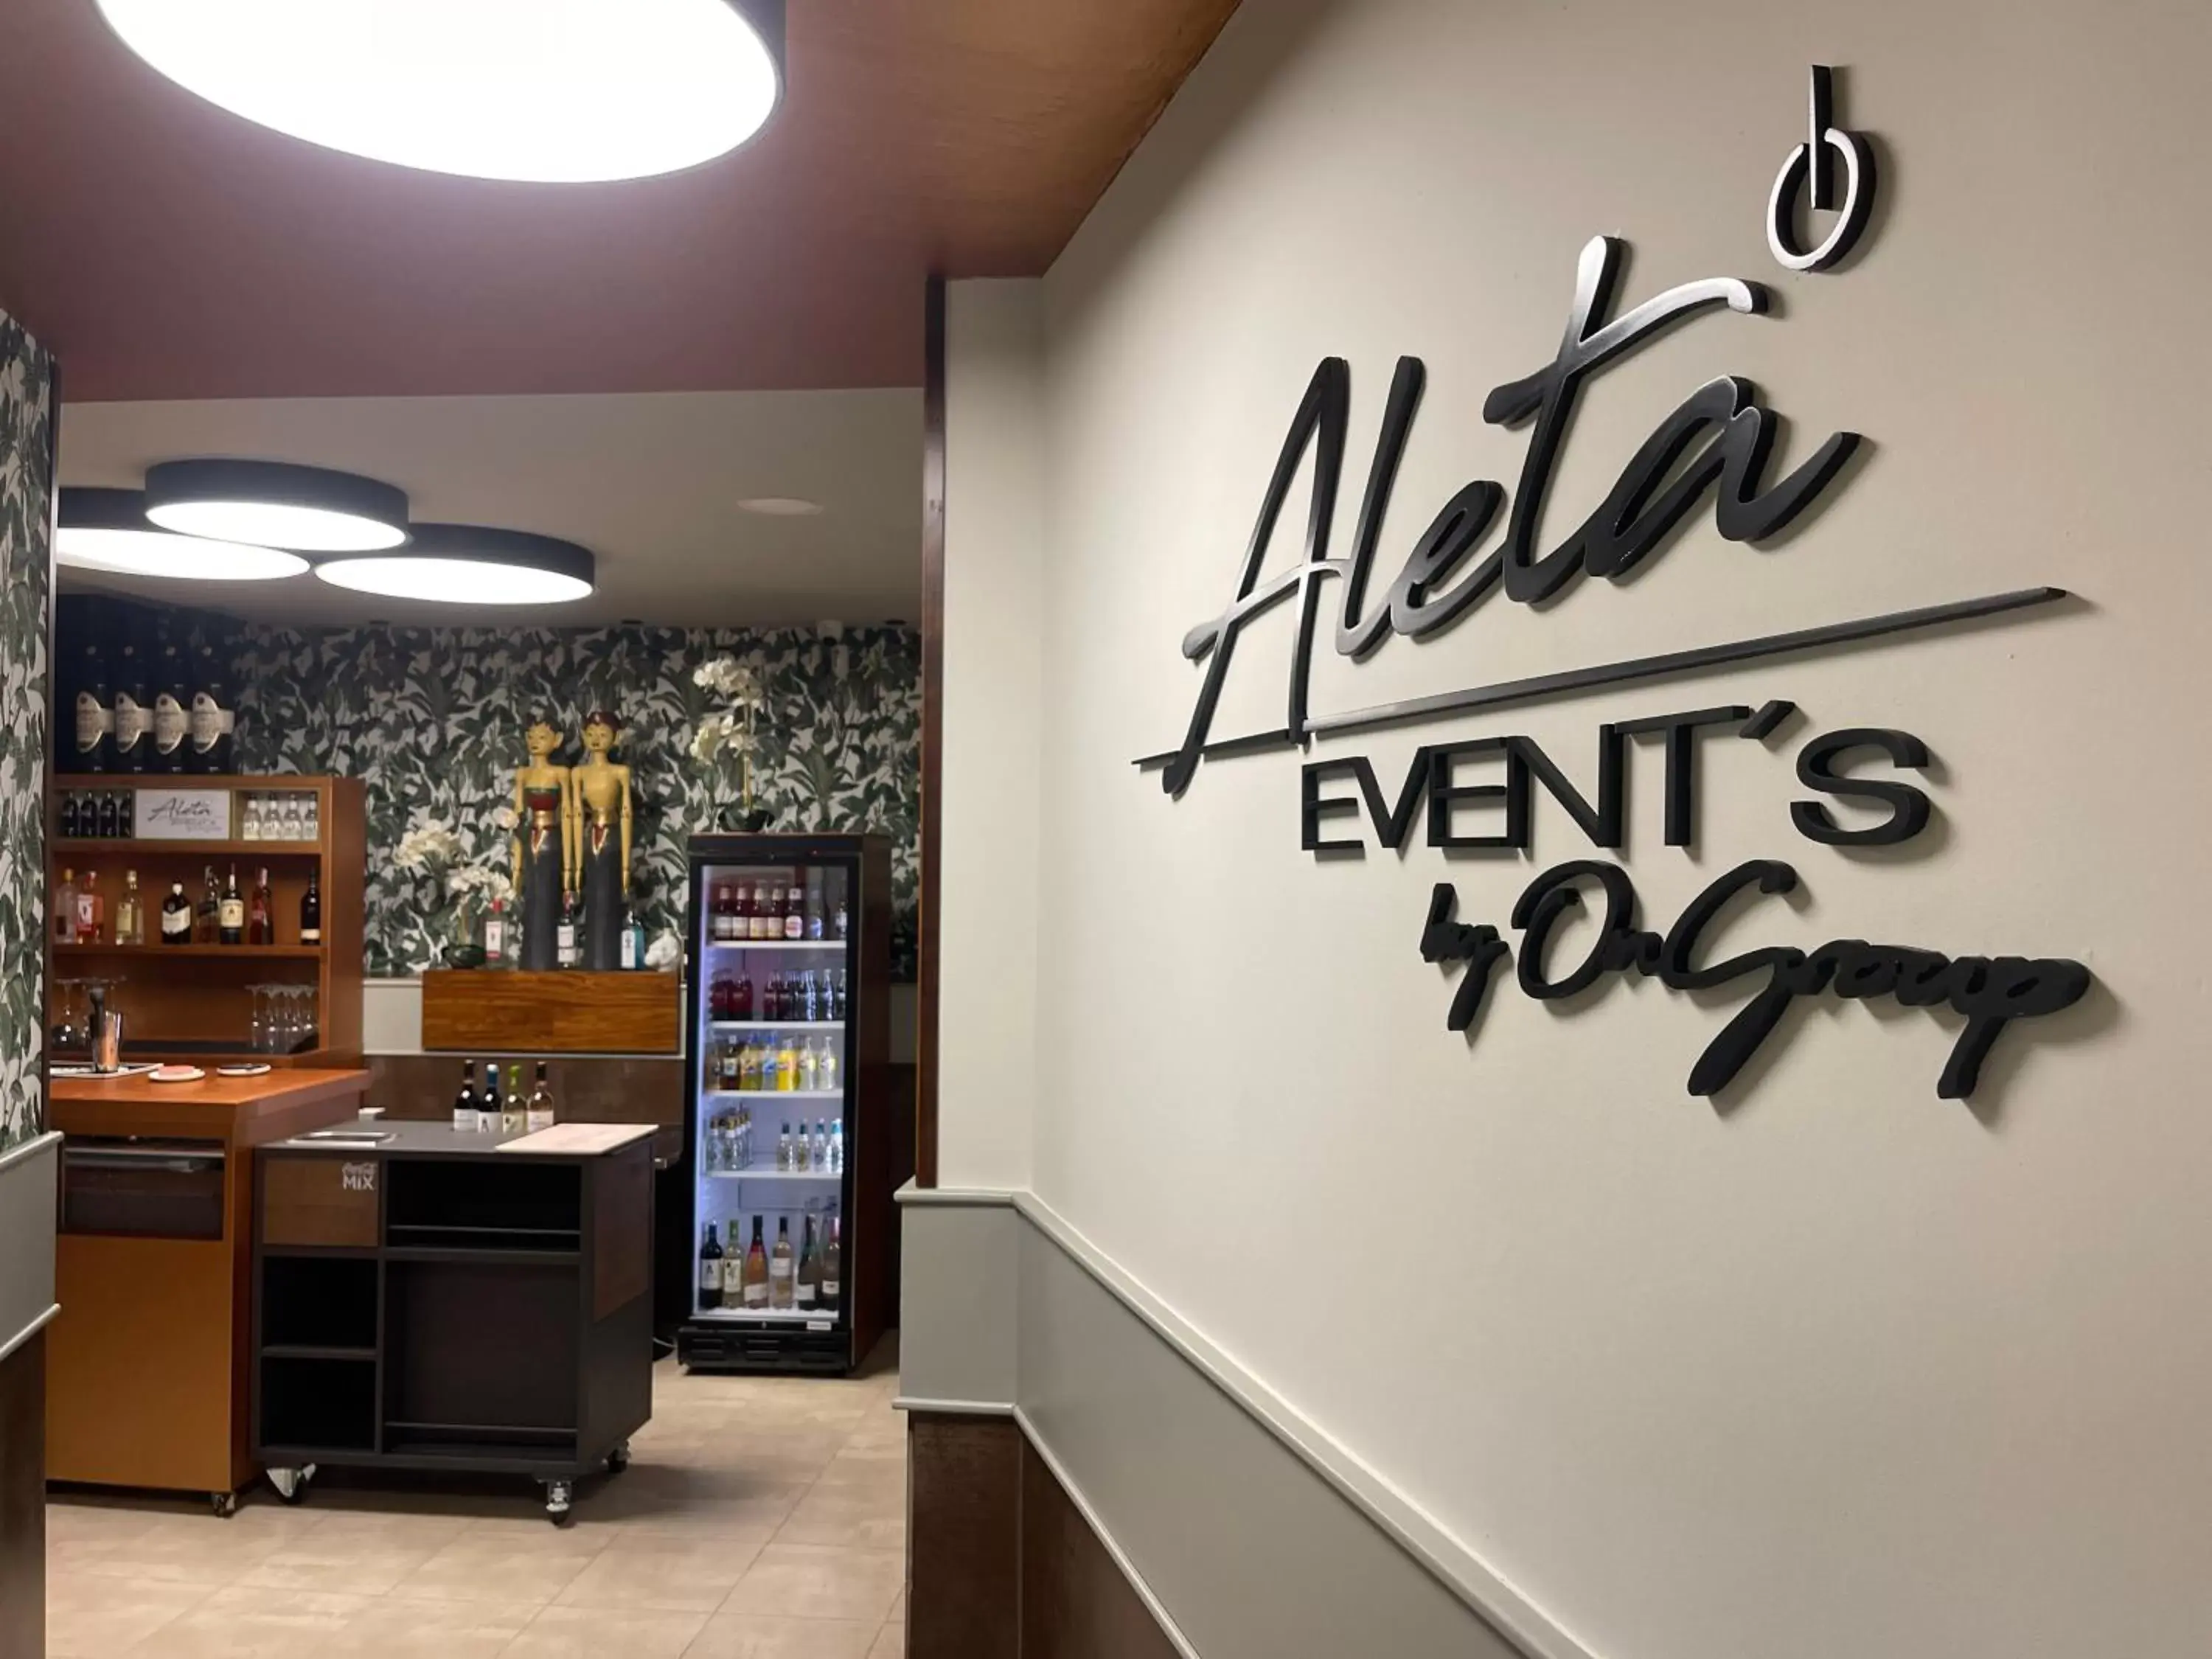 Entertainment in ON ALETA ROOM designed for adults